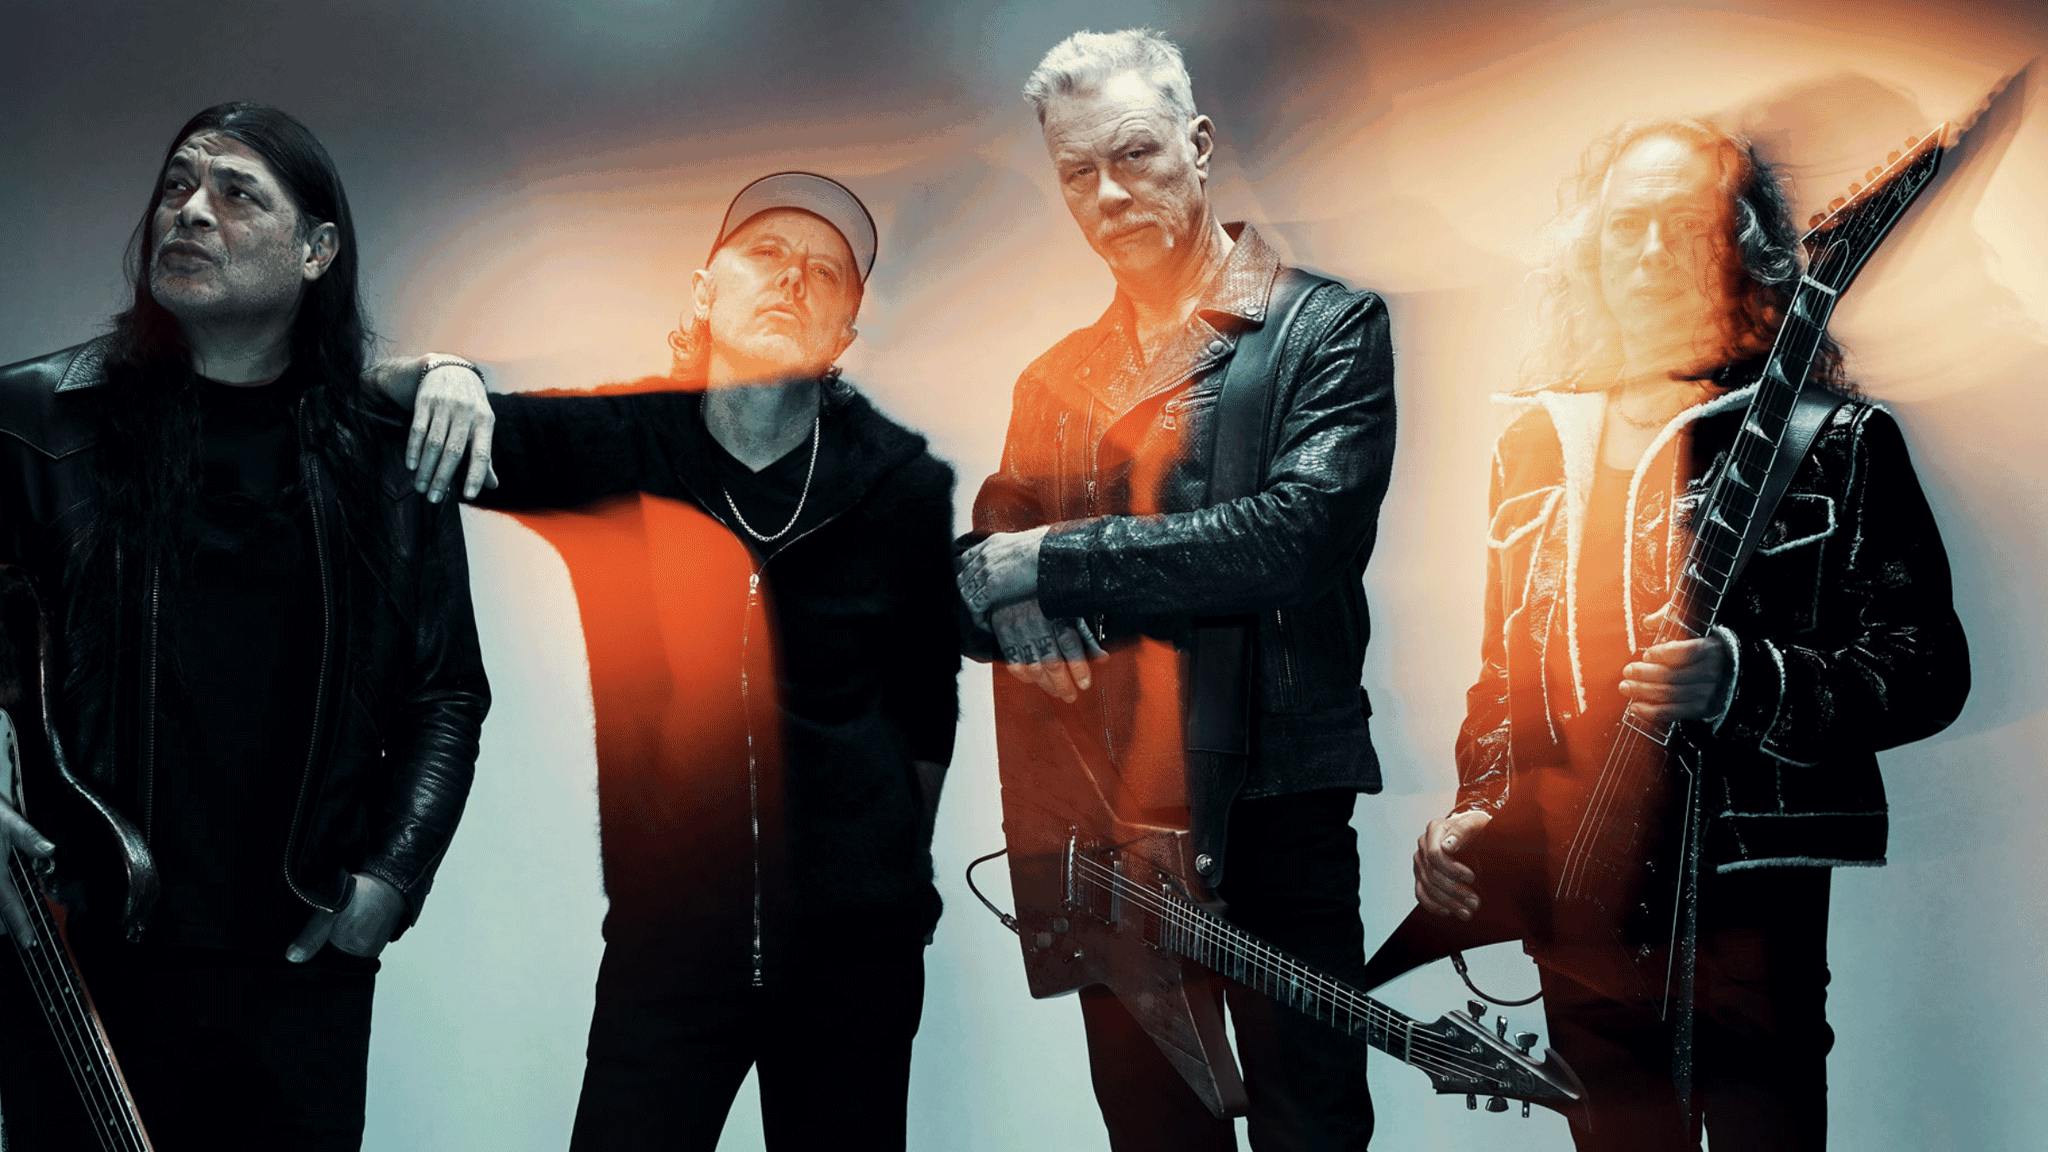 To keep up with demand, Metallica have bought a vinyl pressing plant